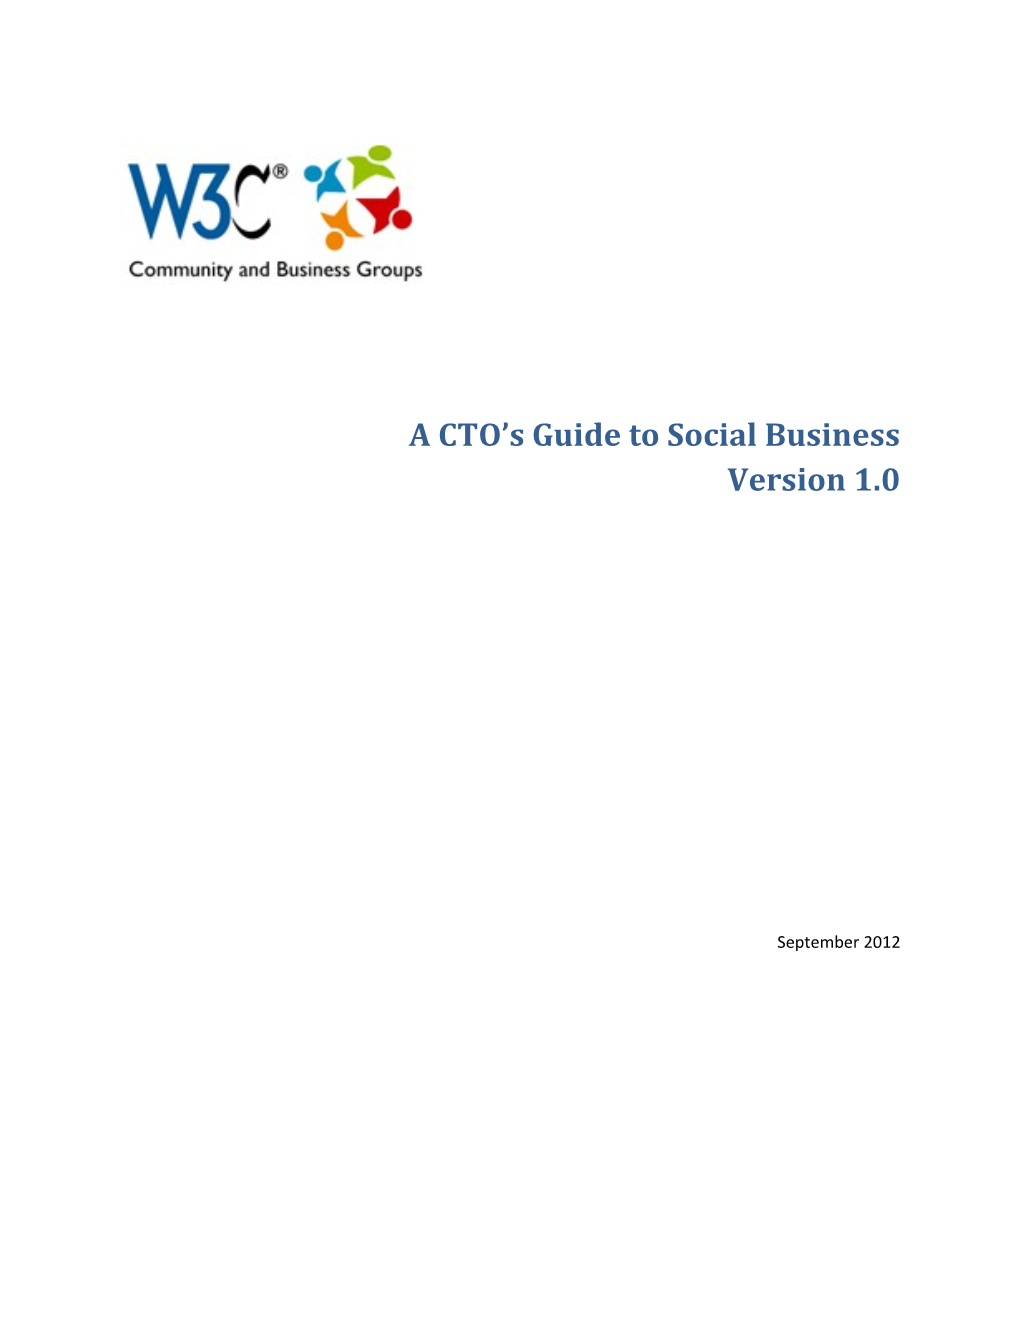 A CTO S Guide to Social Businessversion 1.0